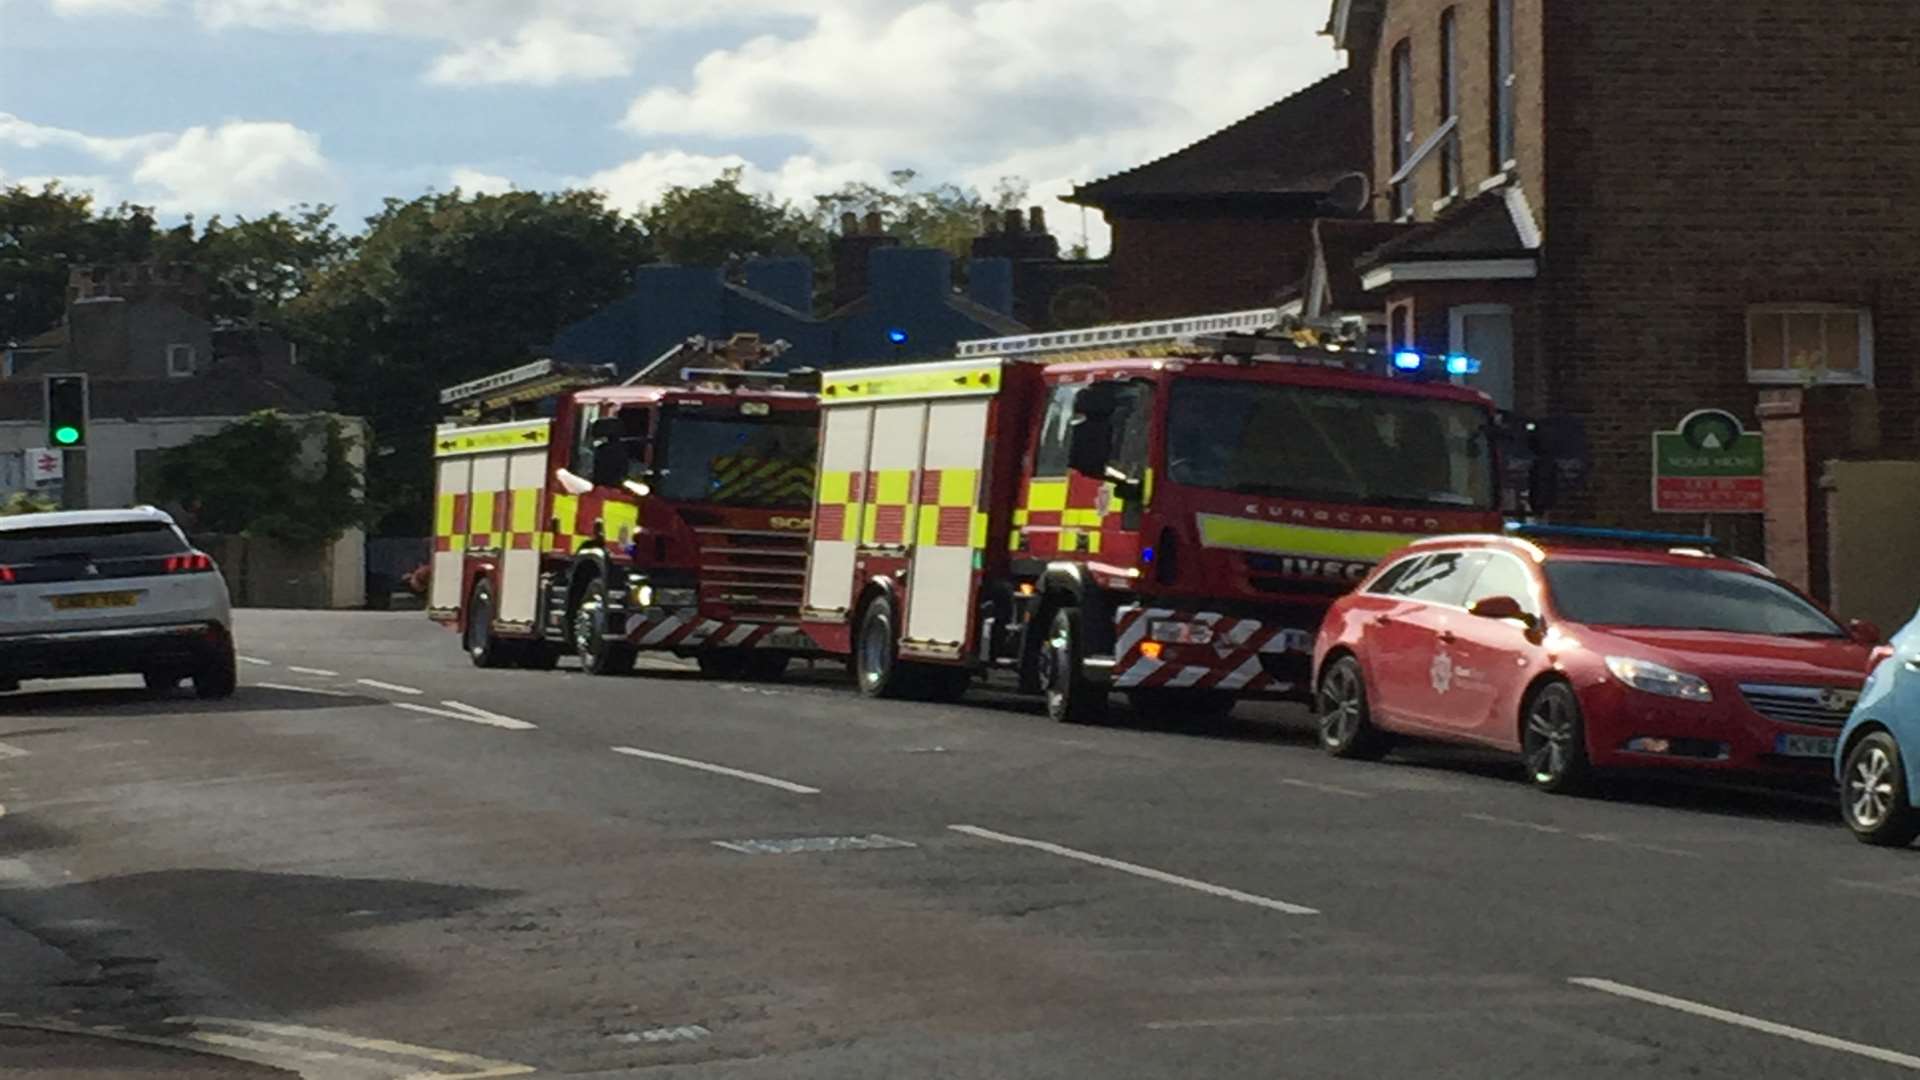 Fire crews at Queen Street in Deal, picture by Jamie Morrison